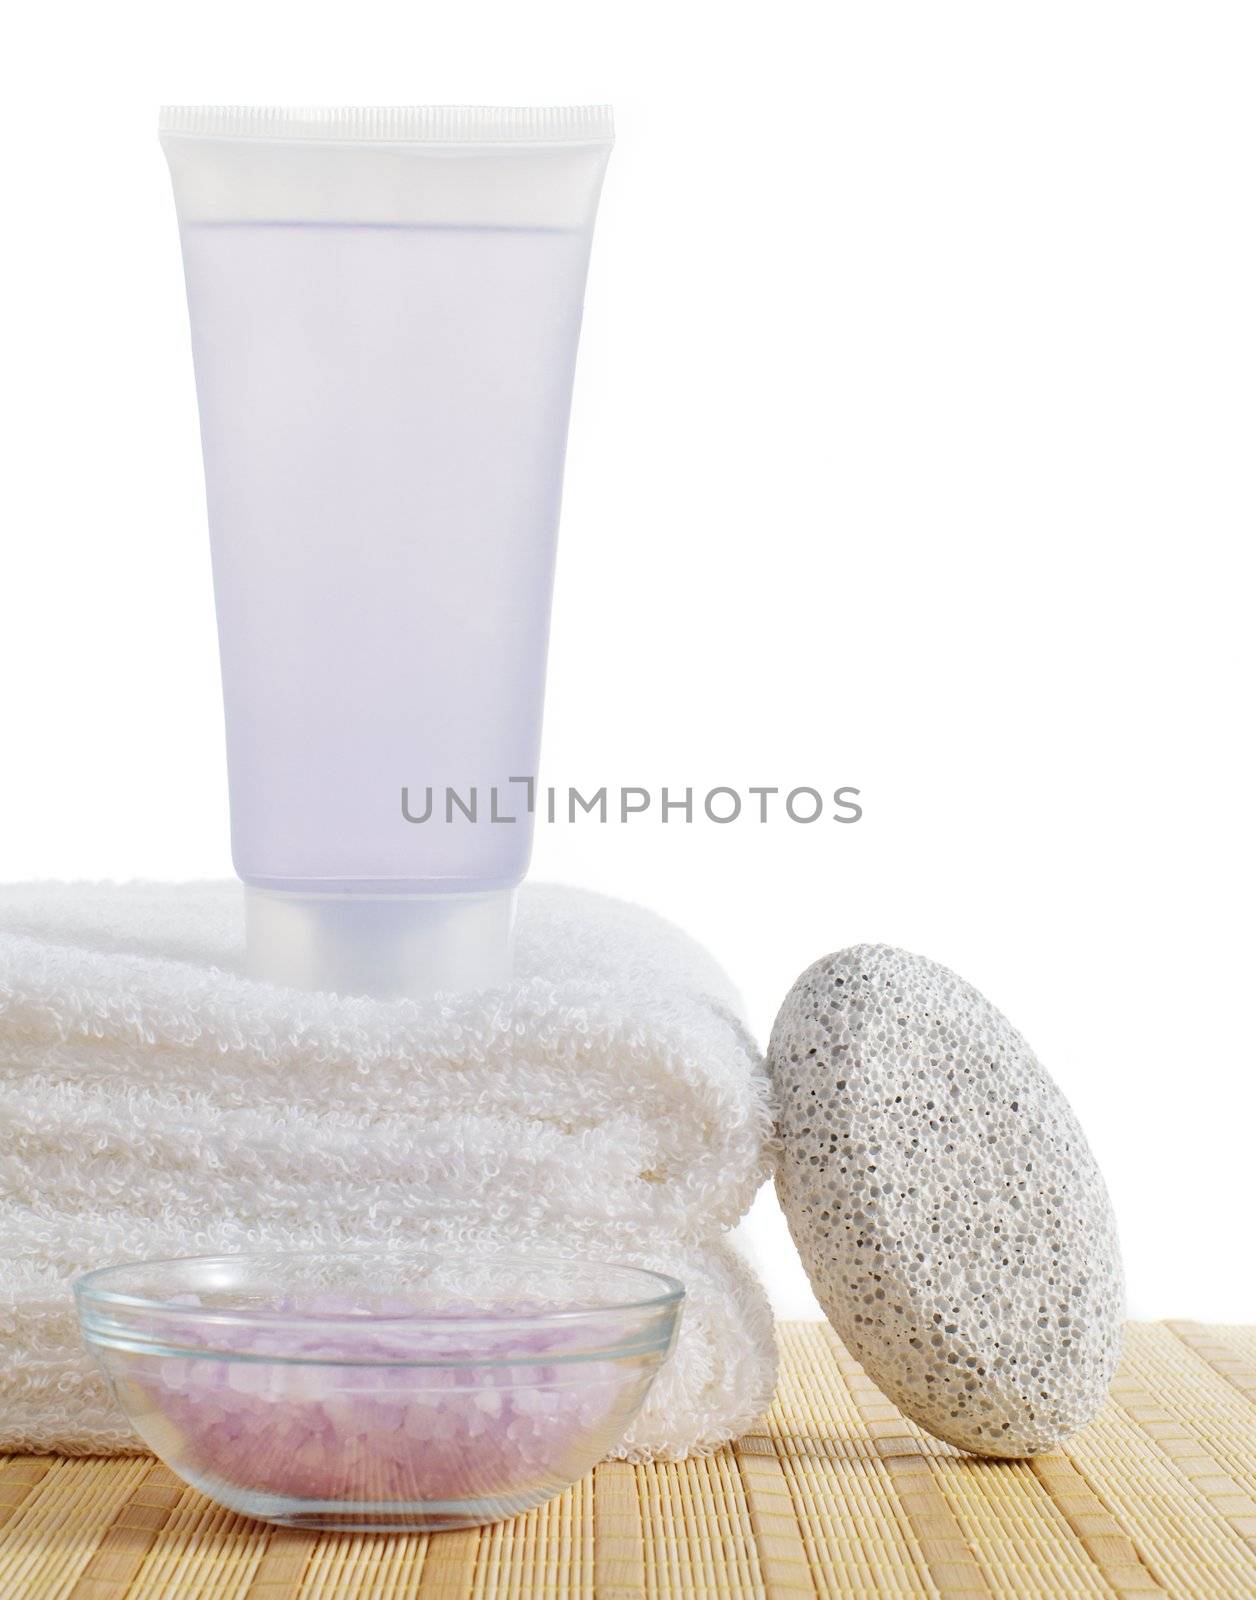 Bath products being displayed against a white background.